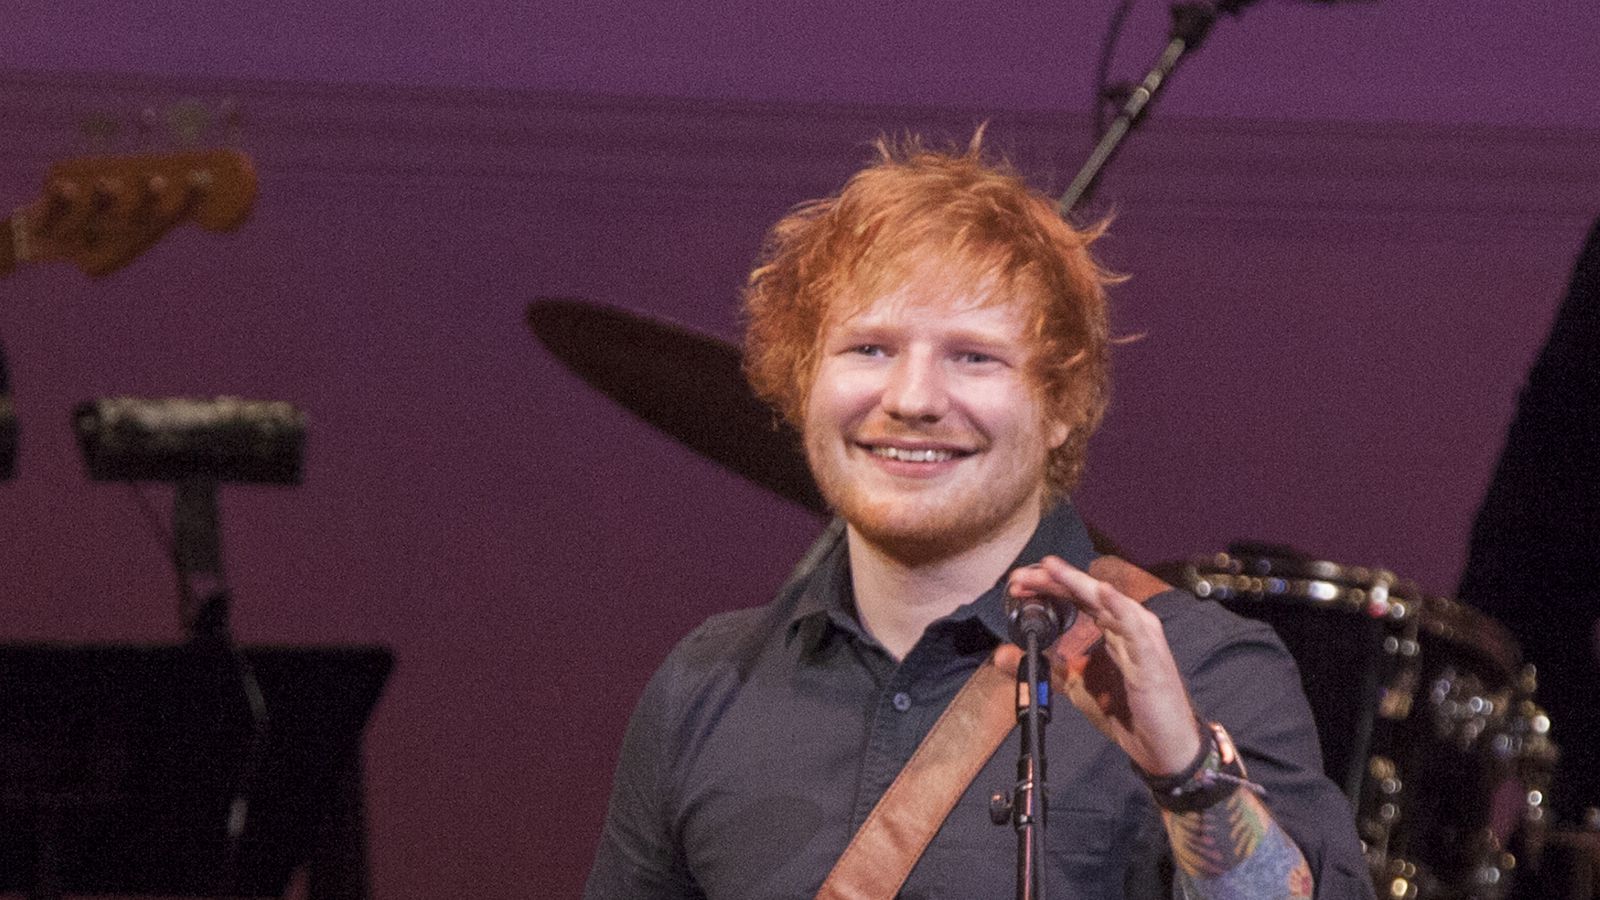 Spotify's biggest hit is an Ed Sheeran song.